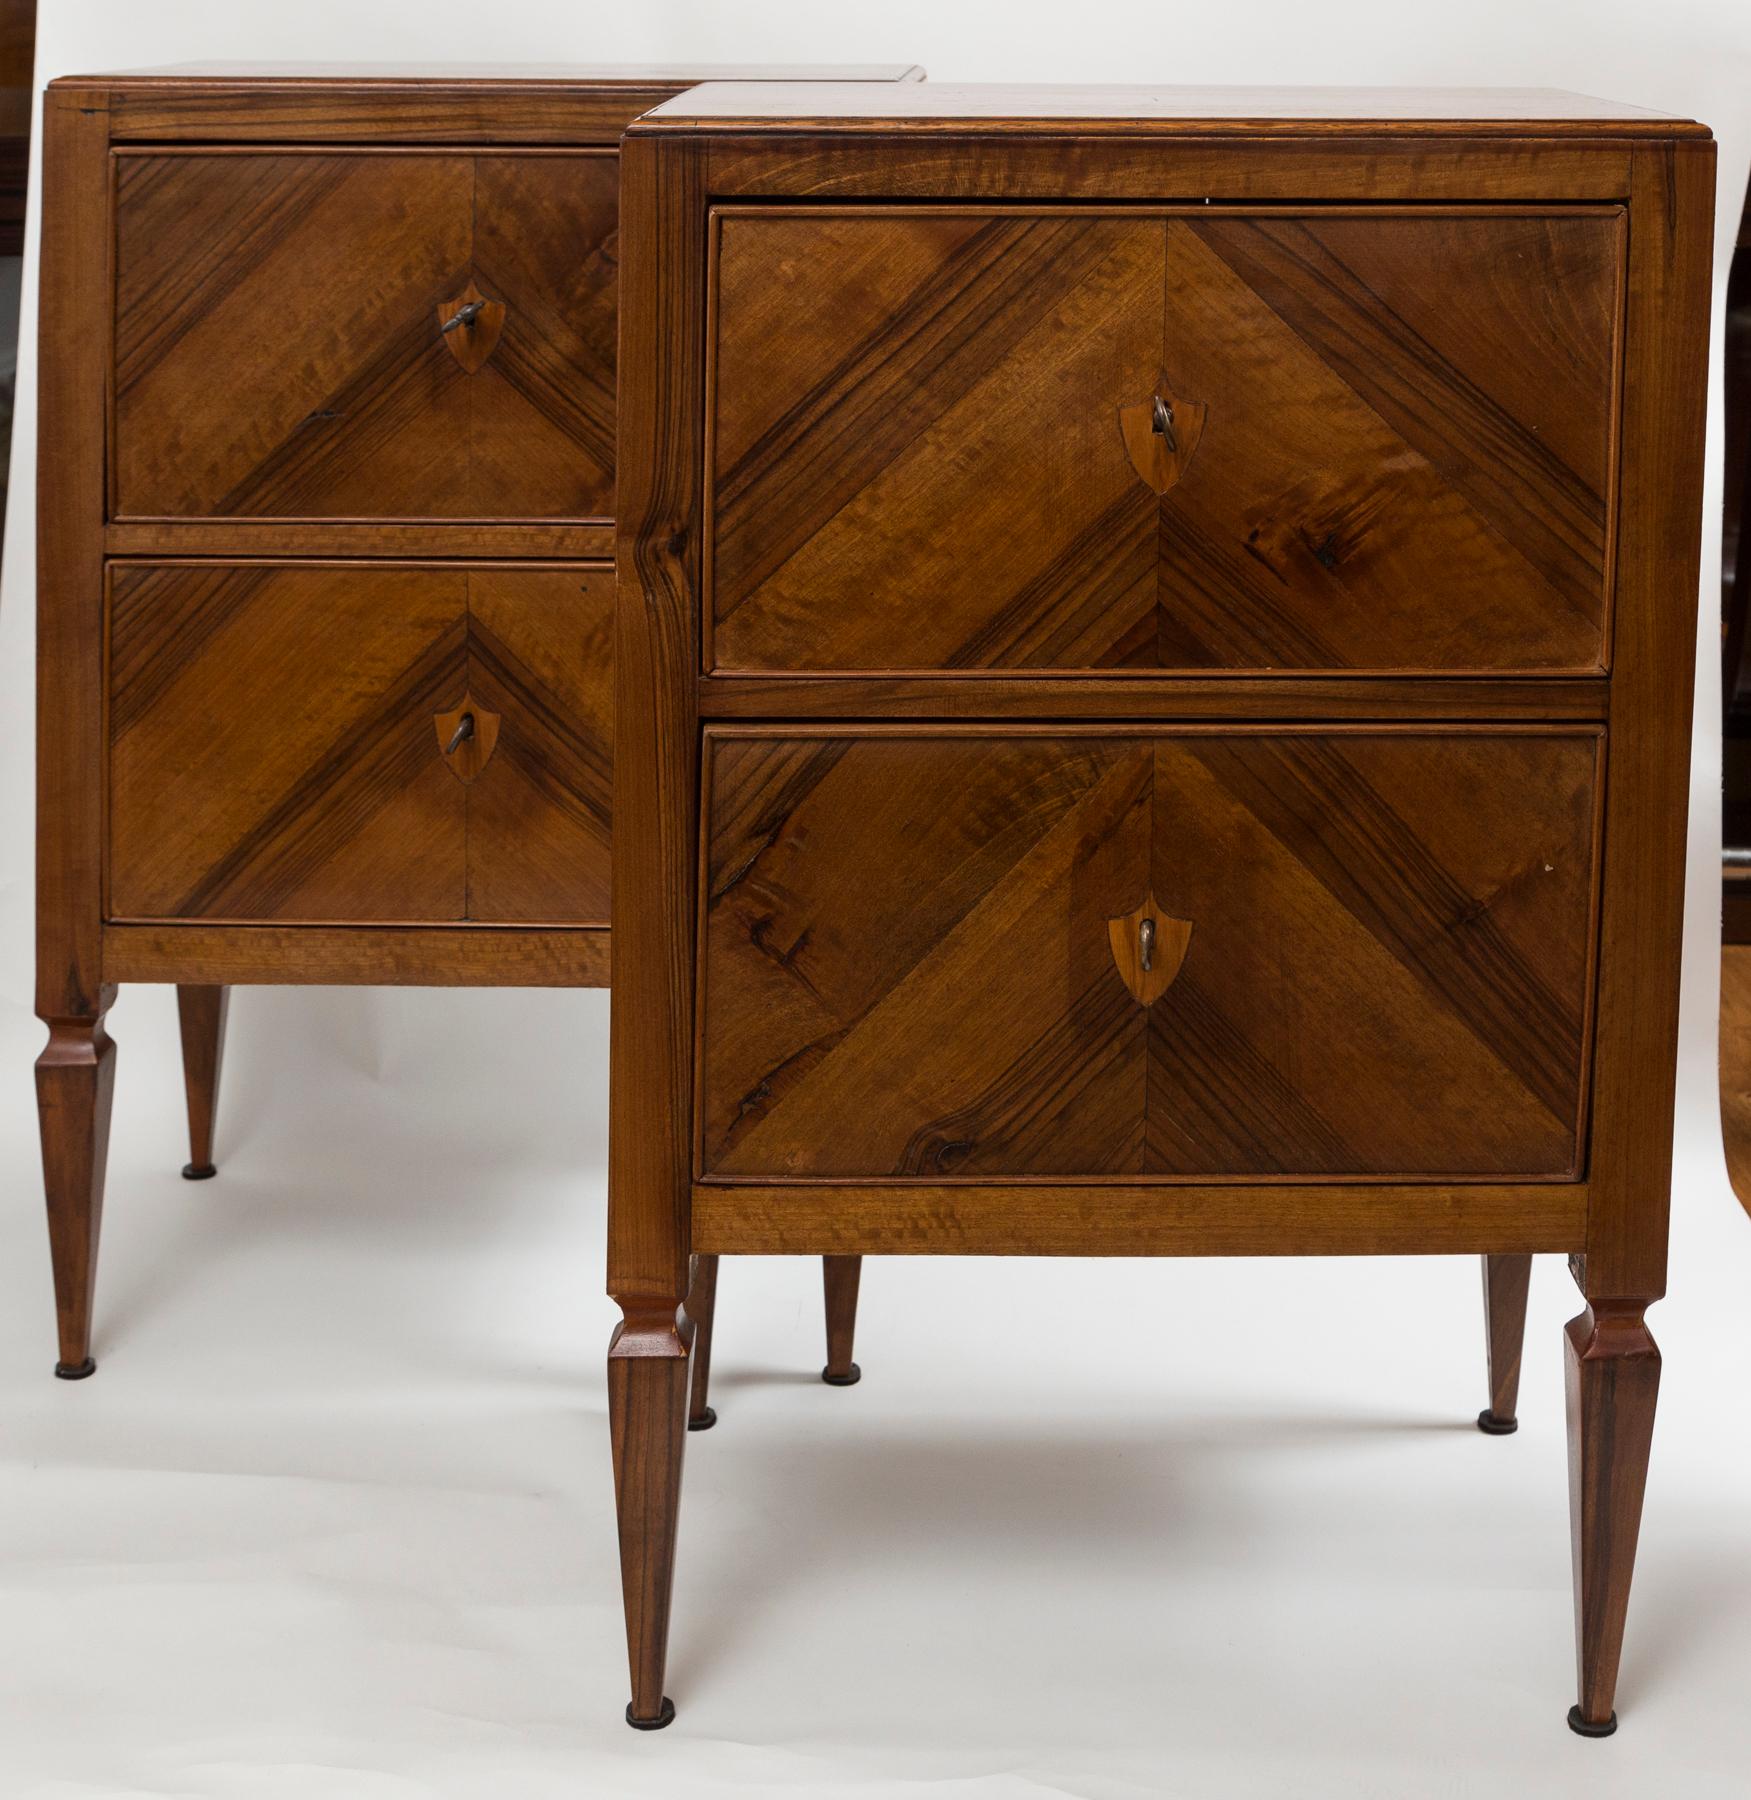 Neoclassical 20th Century Italian Walnut Bedside Tables For Sale